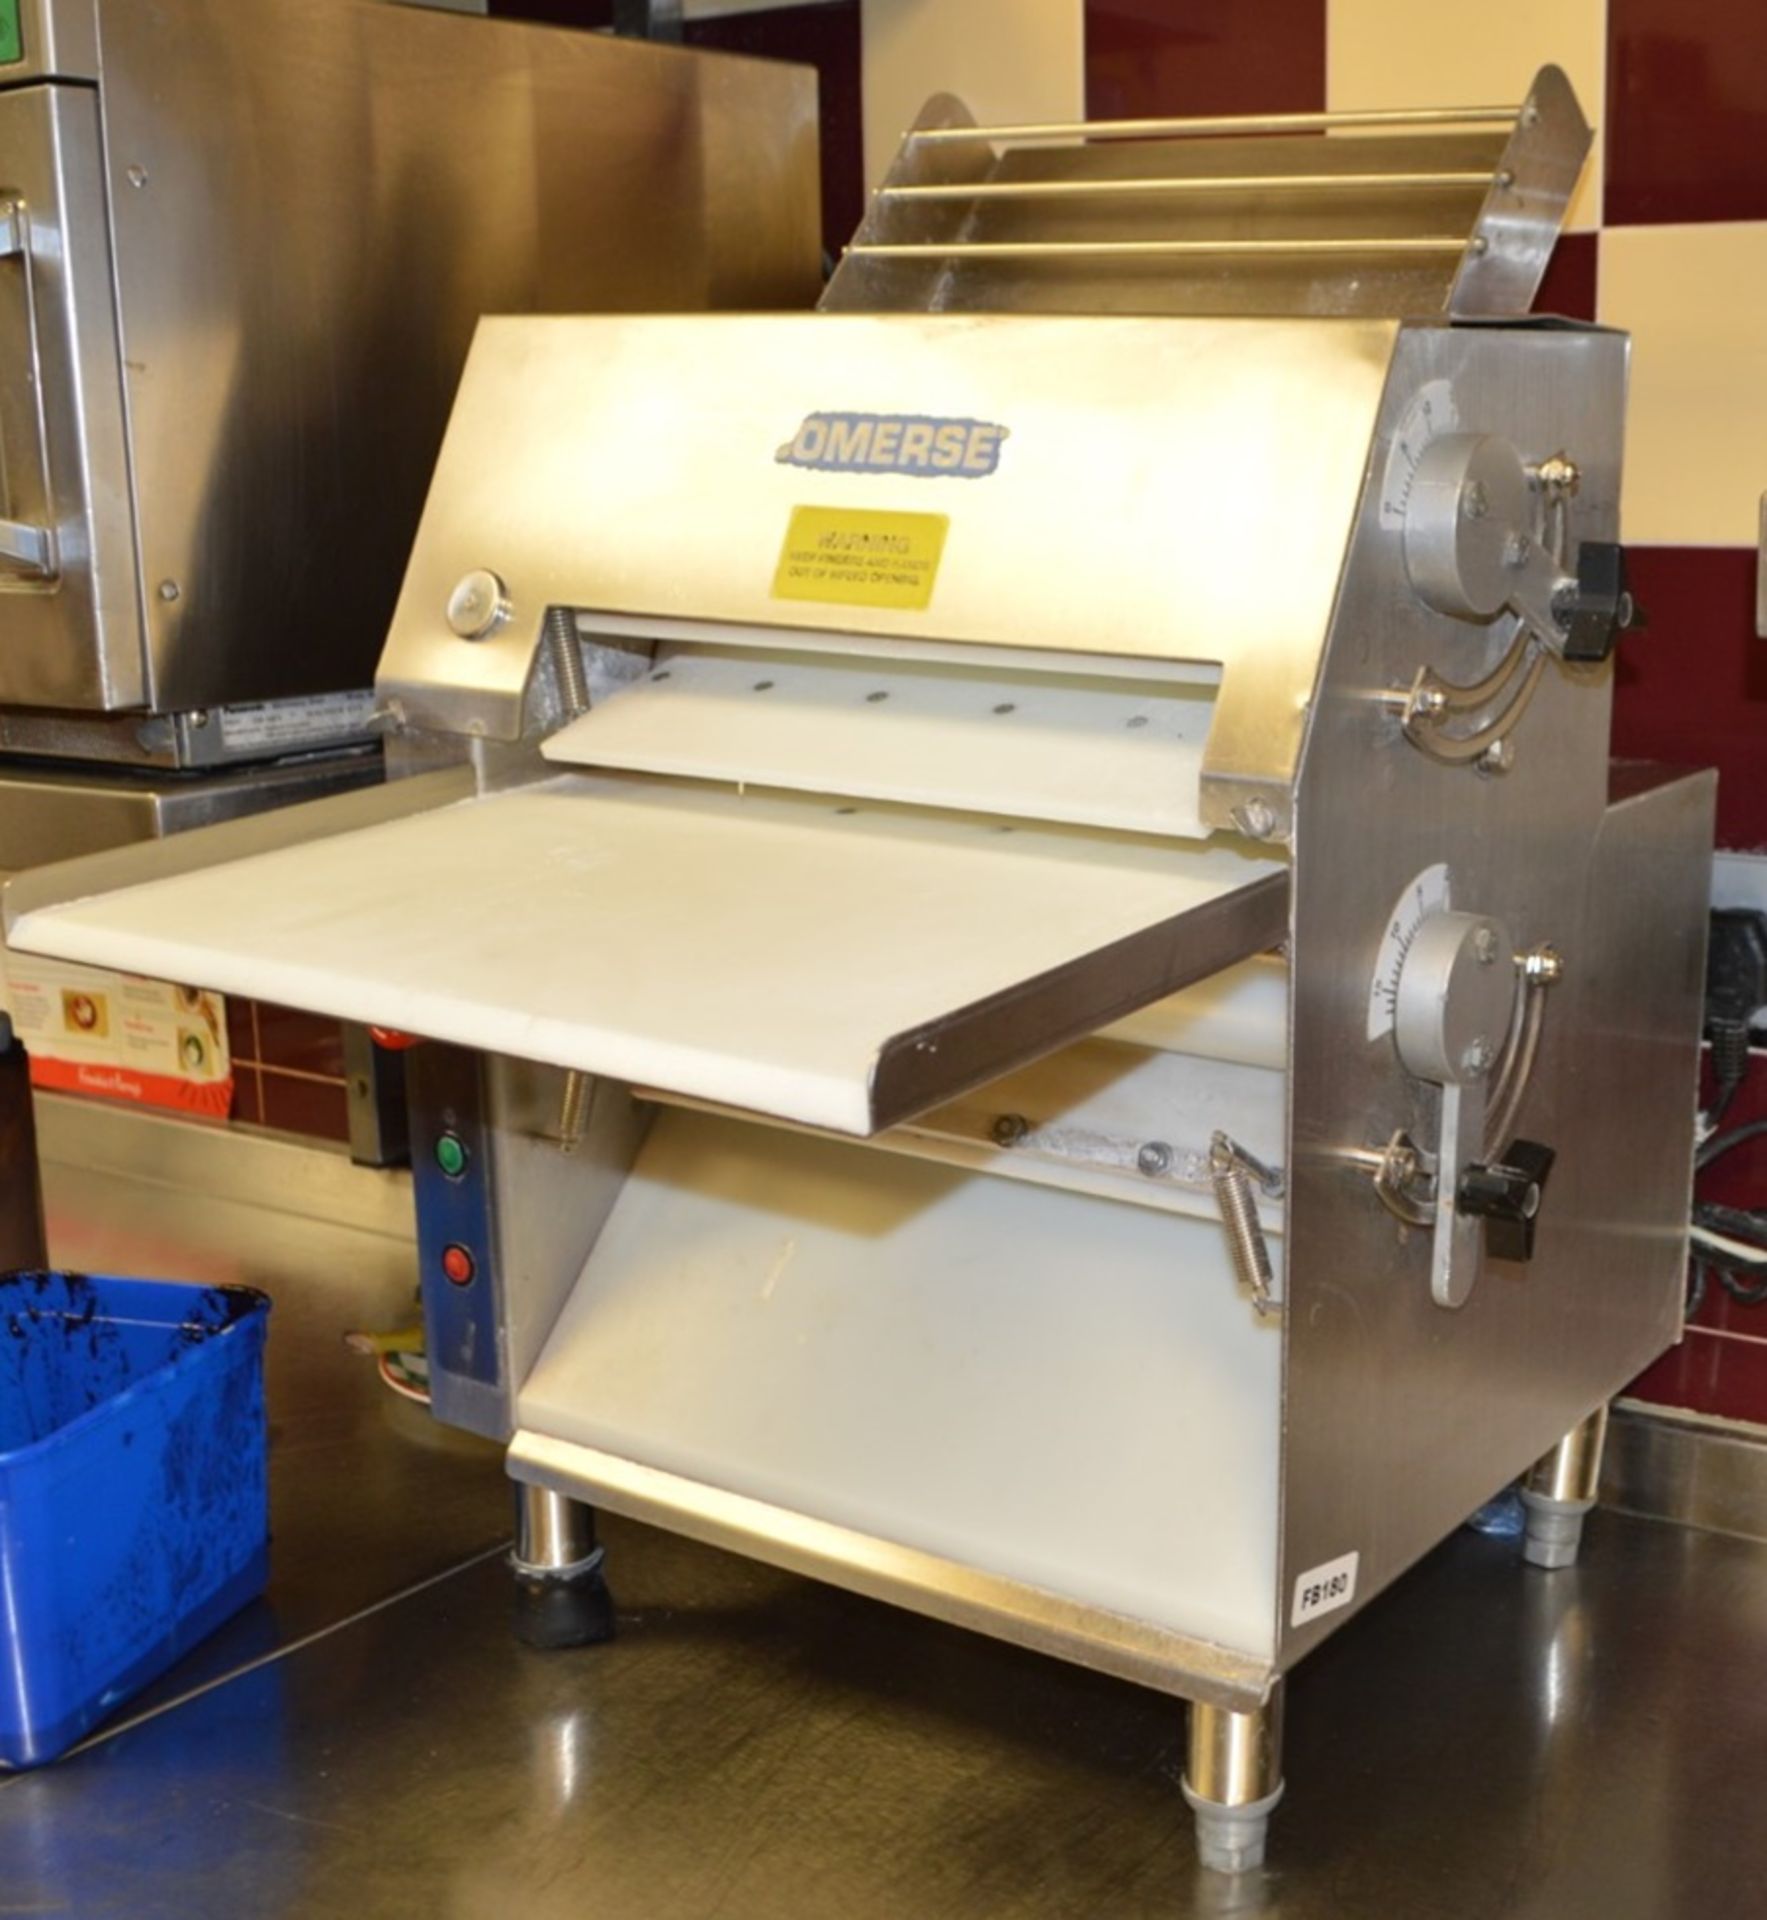 1 x Somerset Dough Roller - Model CDR1550 - Suitable For Pizza, Naans, Chatati Wraps etc - Ref FB180 - Image 3 of 6